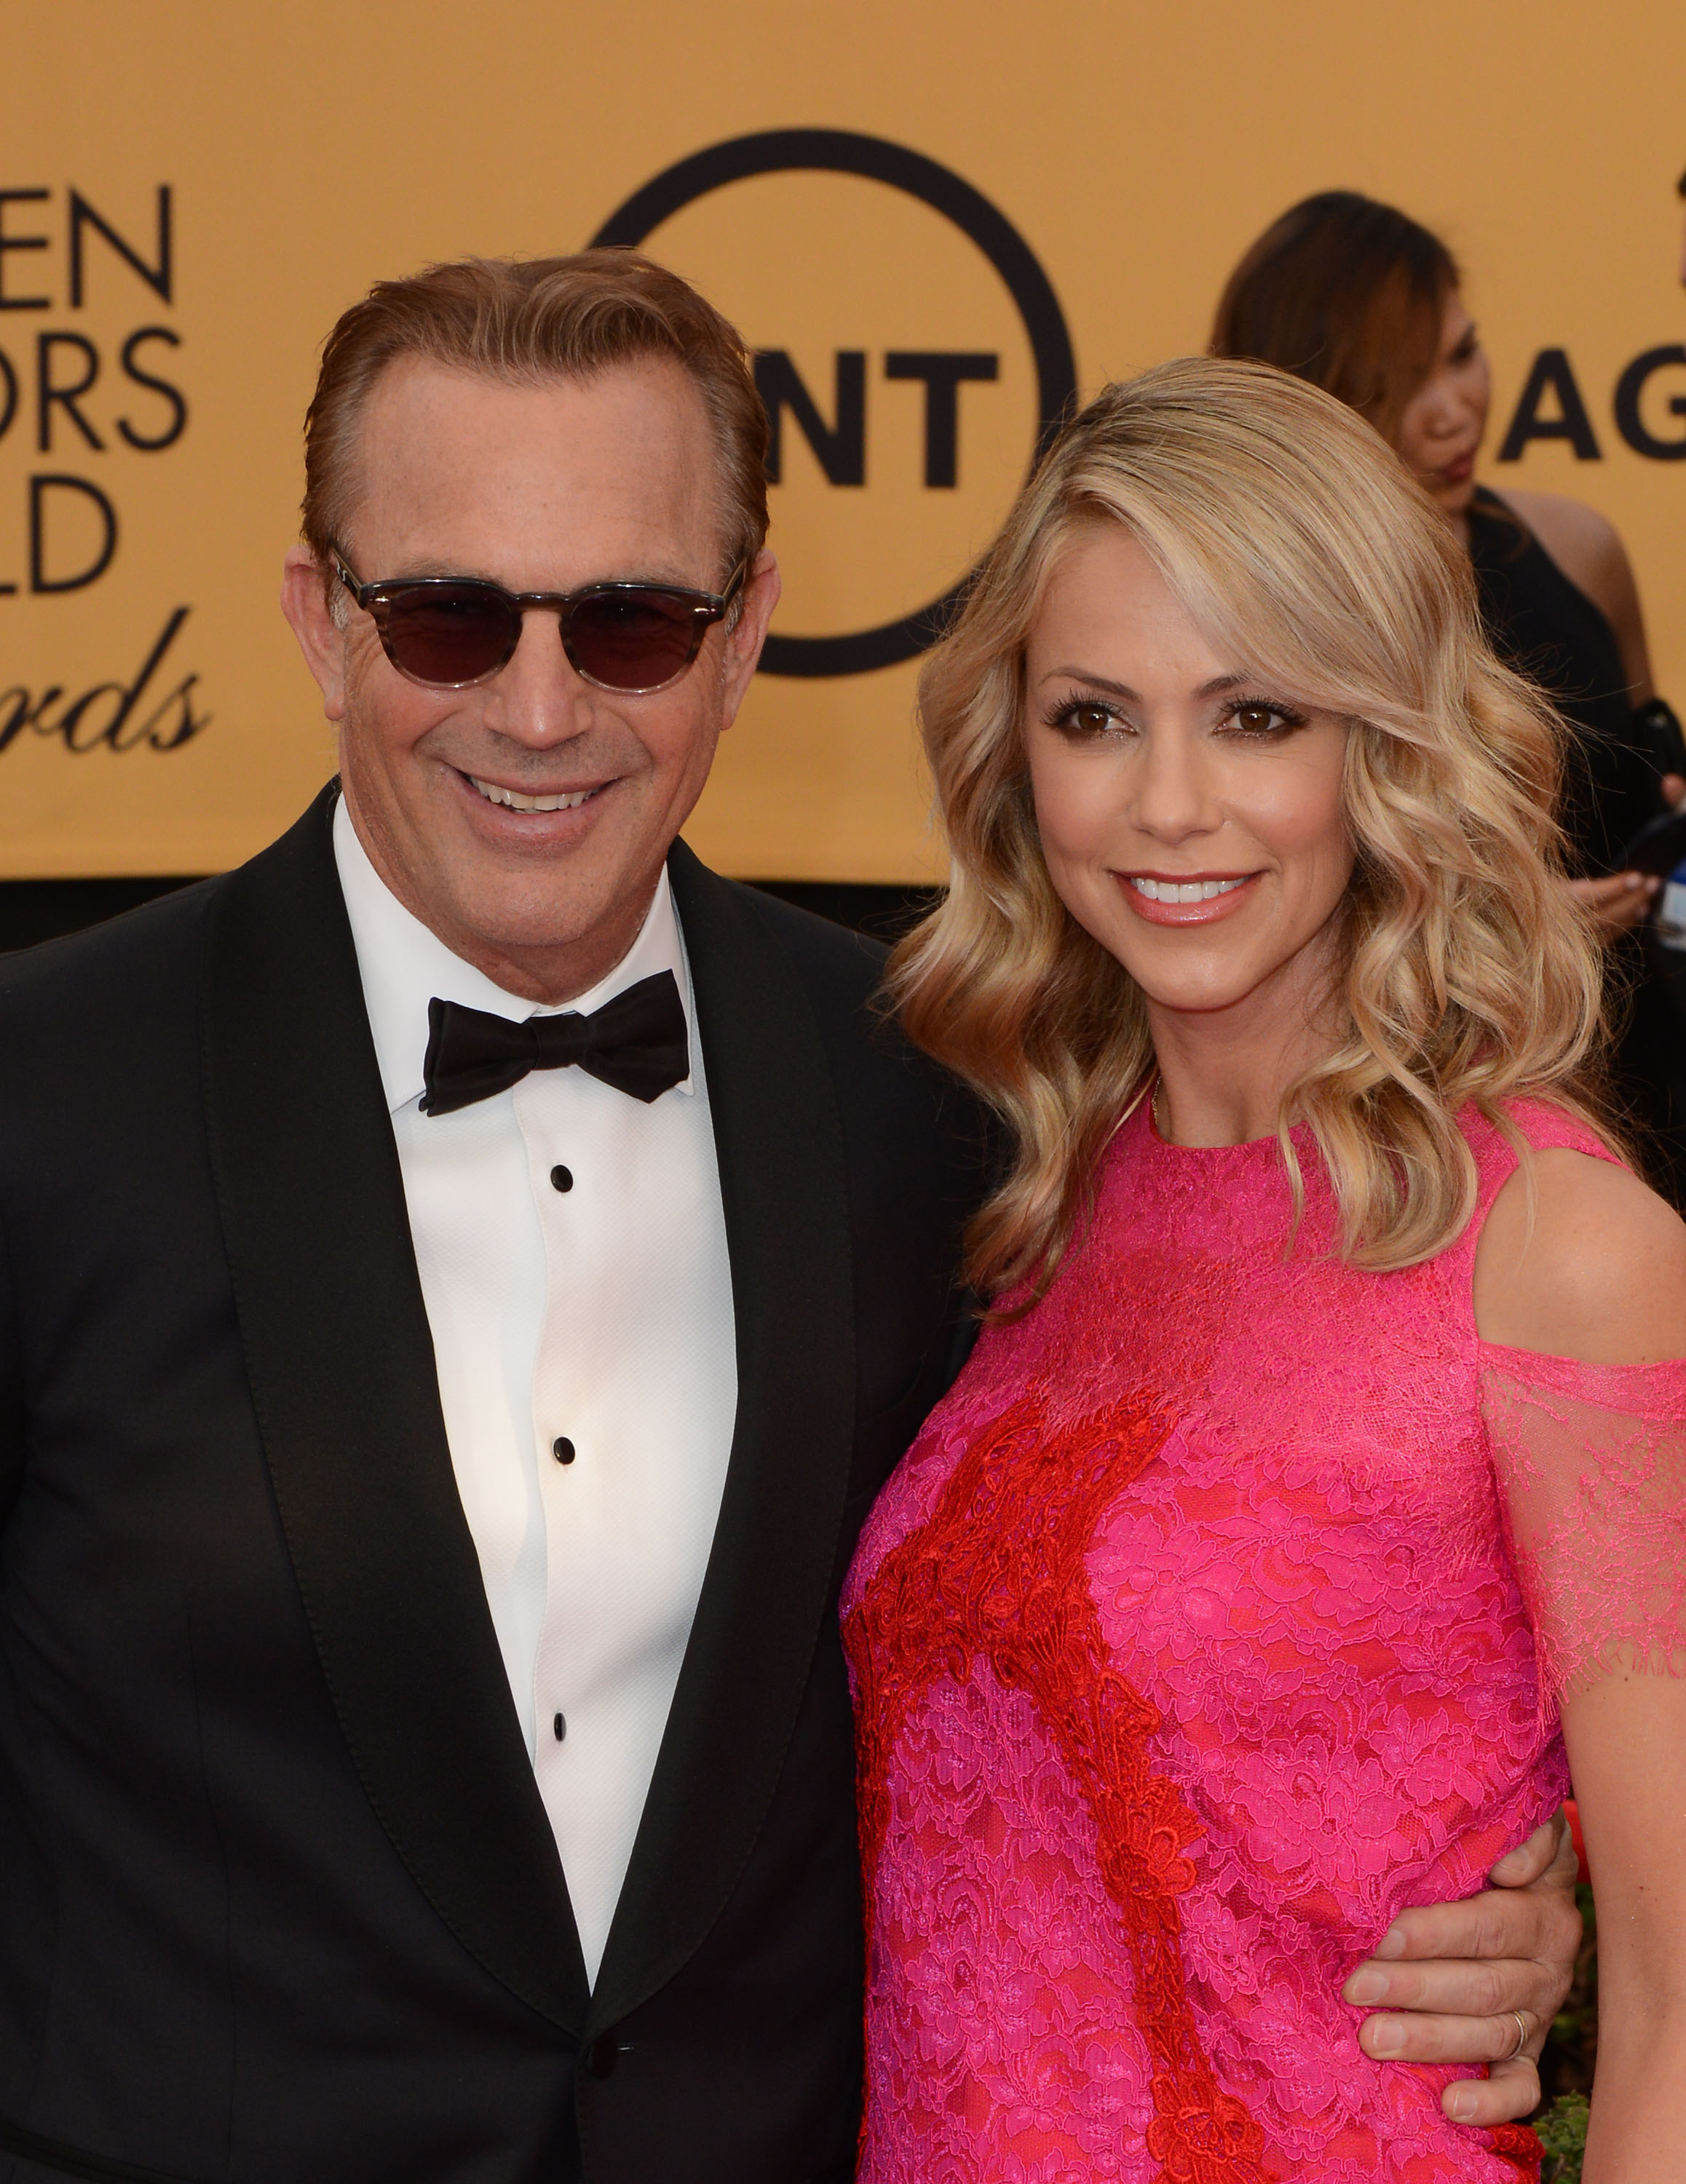 Kevin Costner and wife Christine Baumgartner at TNT's 21st Annual Screen Actors Guild Awards at The Shrine Auditorium on January 25, 2015 in Los Angeles, California | Source: Getty Images